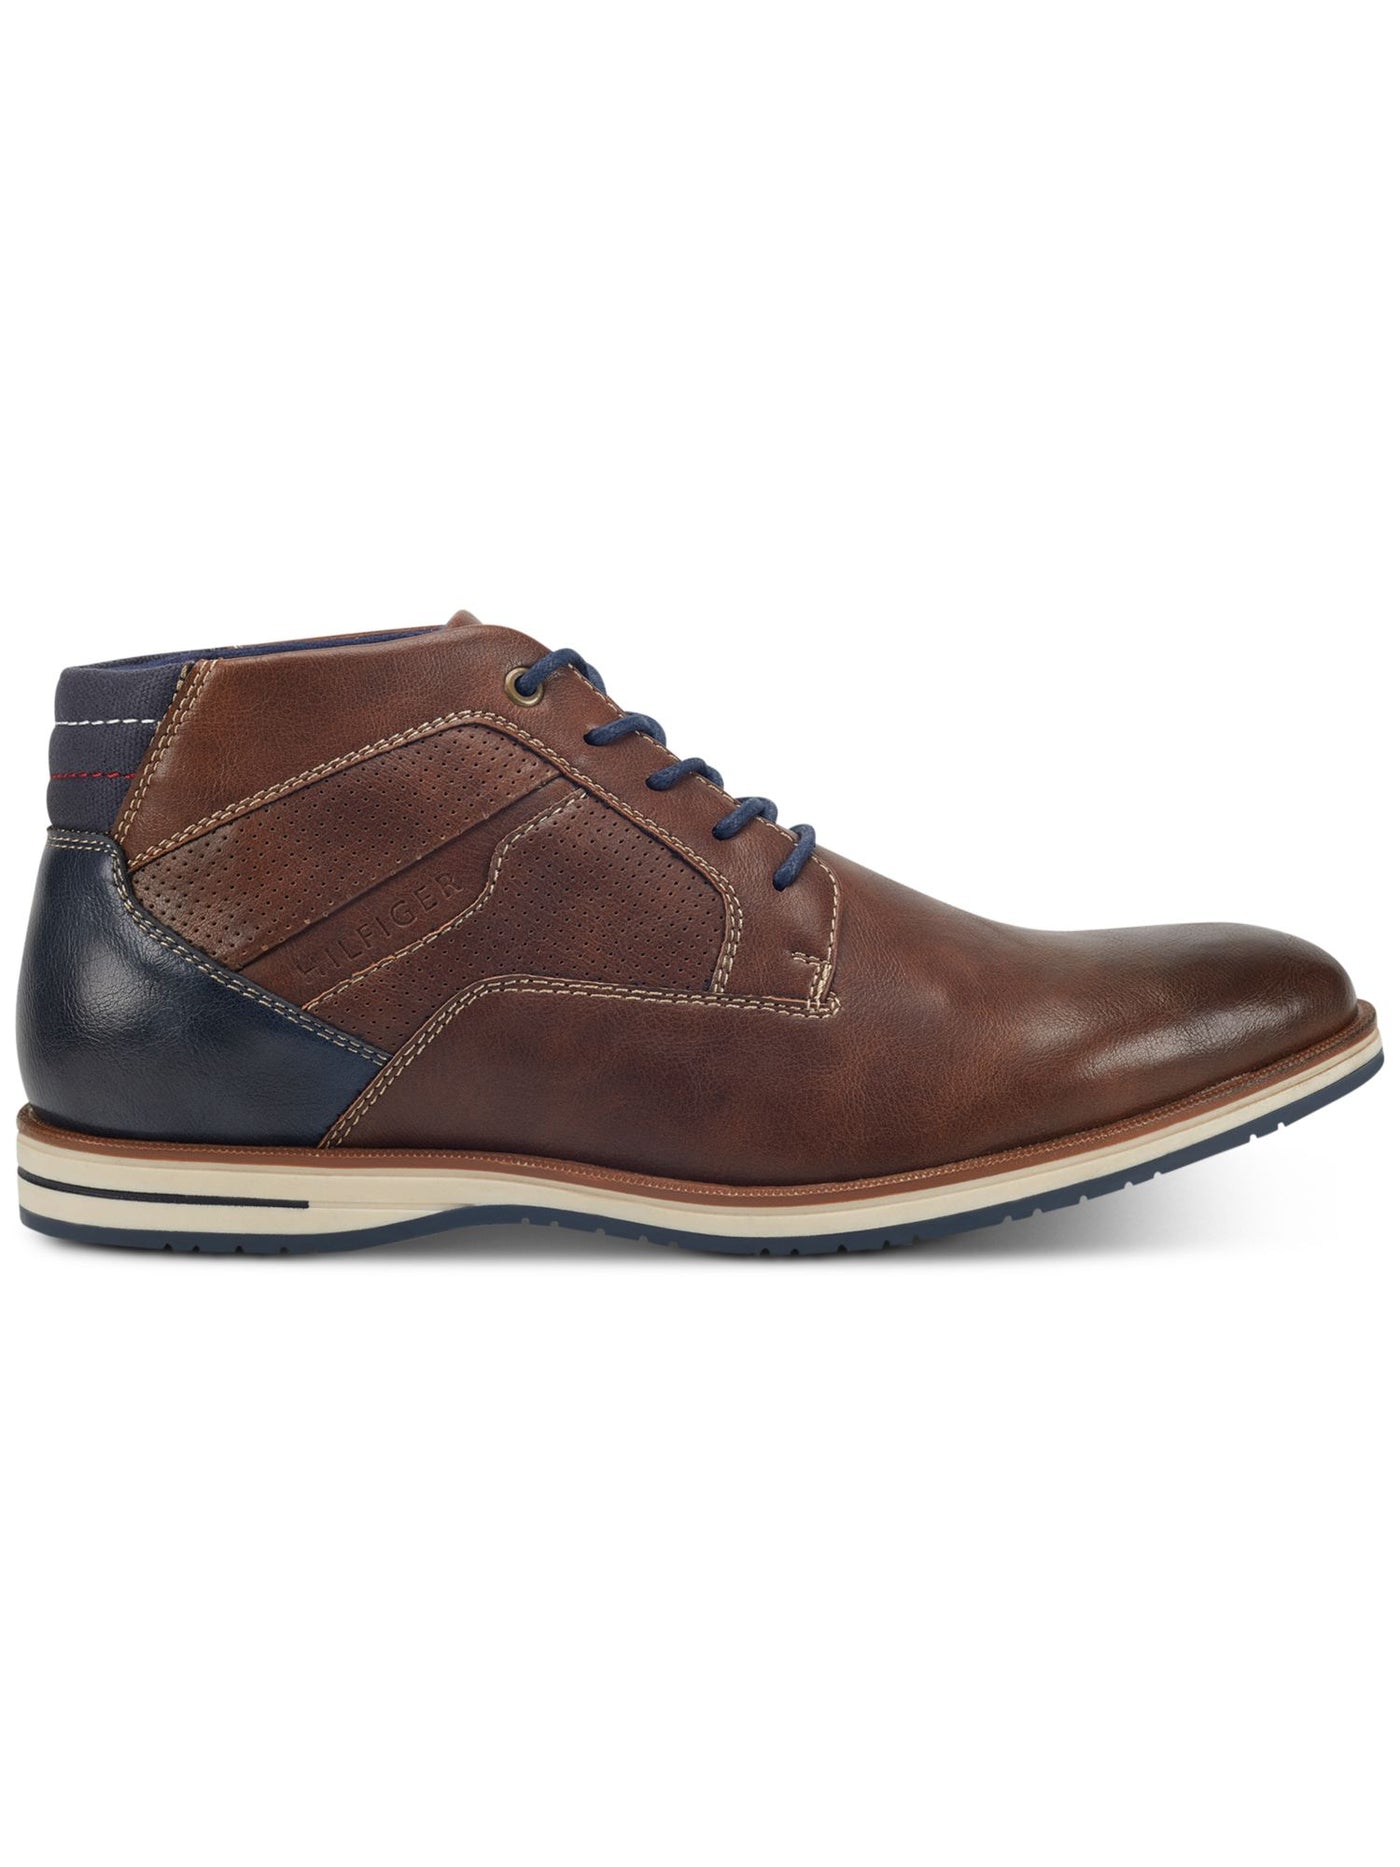 TOMMY HILFIGER Mens Brown Cushioned Comfort Ulan Round Toe Platform Lace-Up Chukka Boots 11.5 M